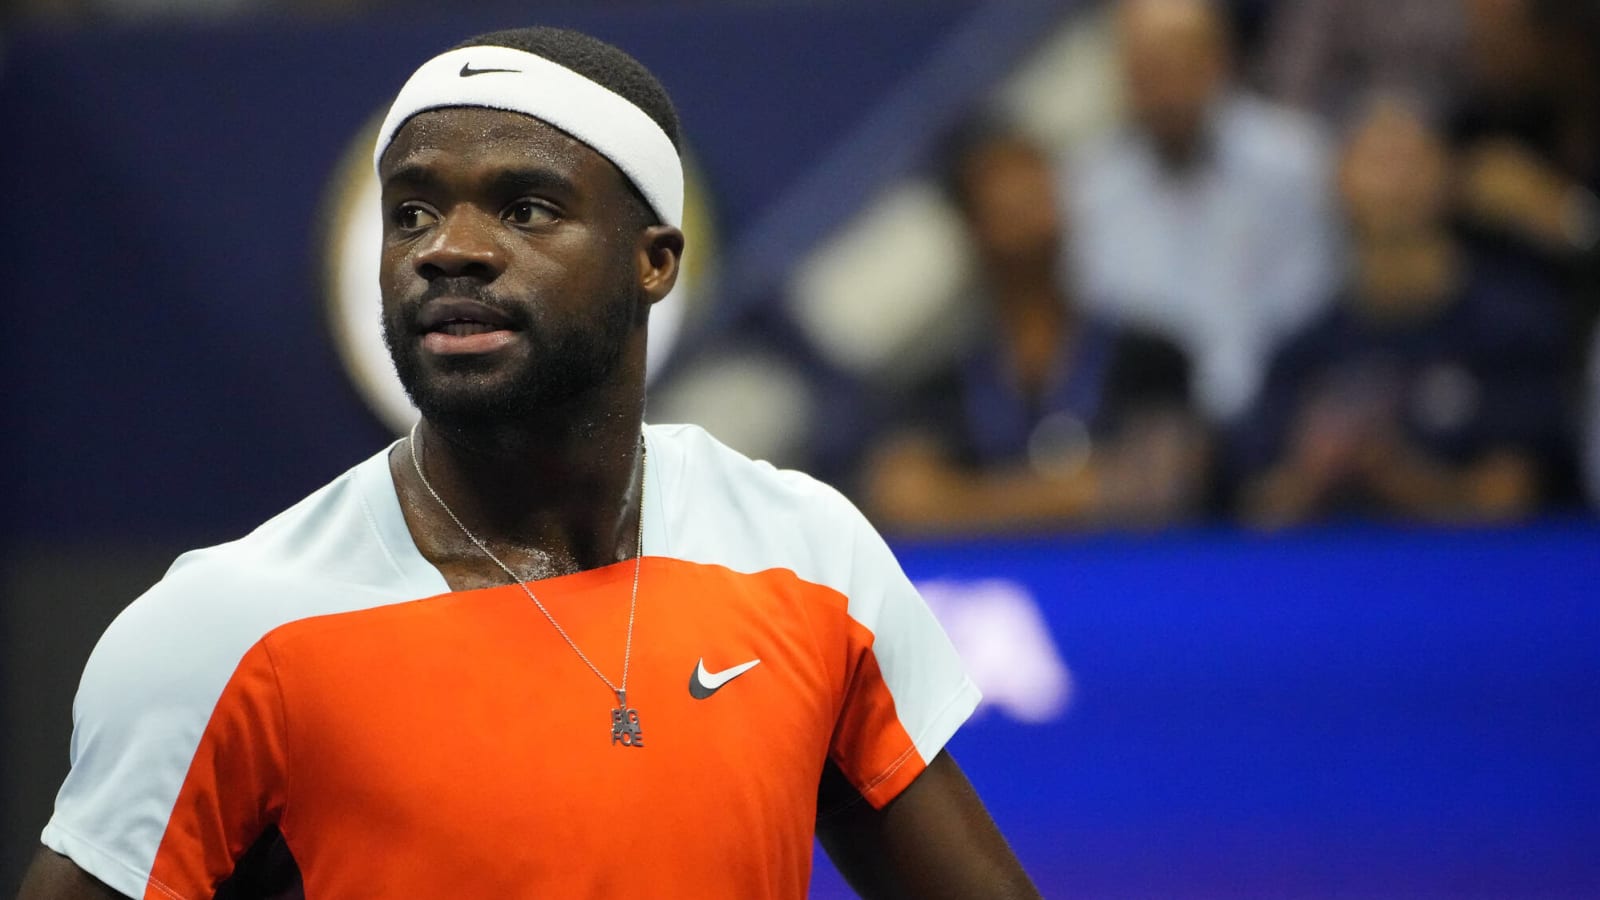 Wizards' Bradley Beal shows Frances Tiafoe support at US Open